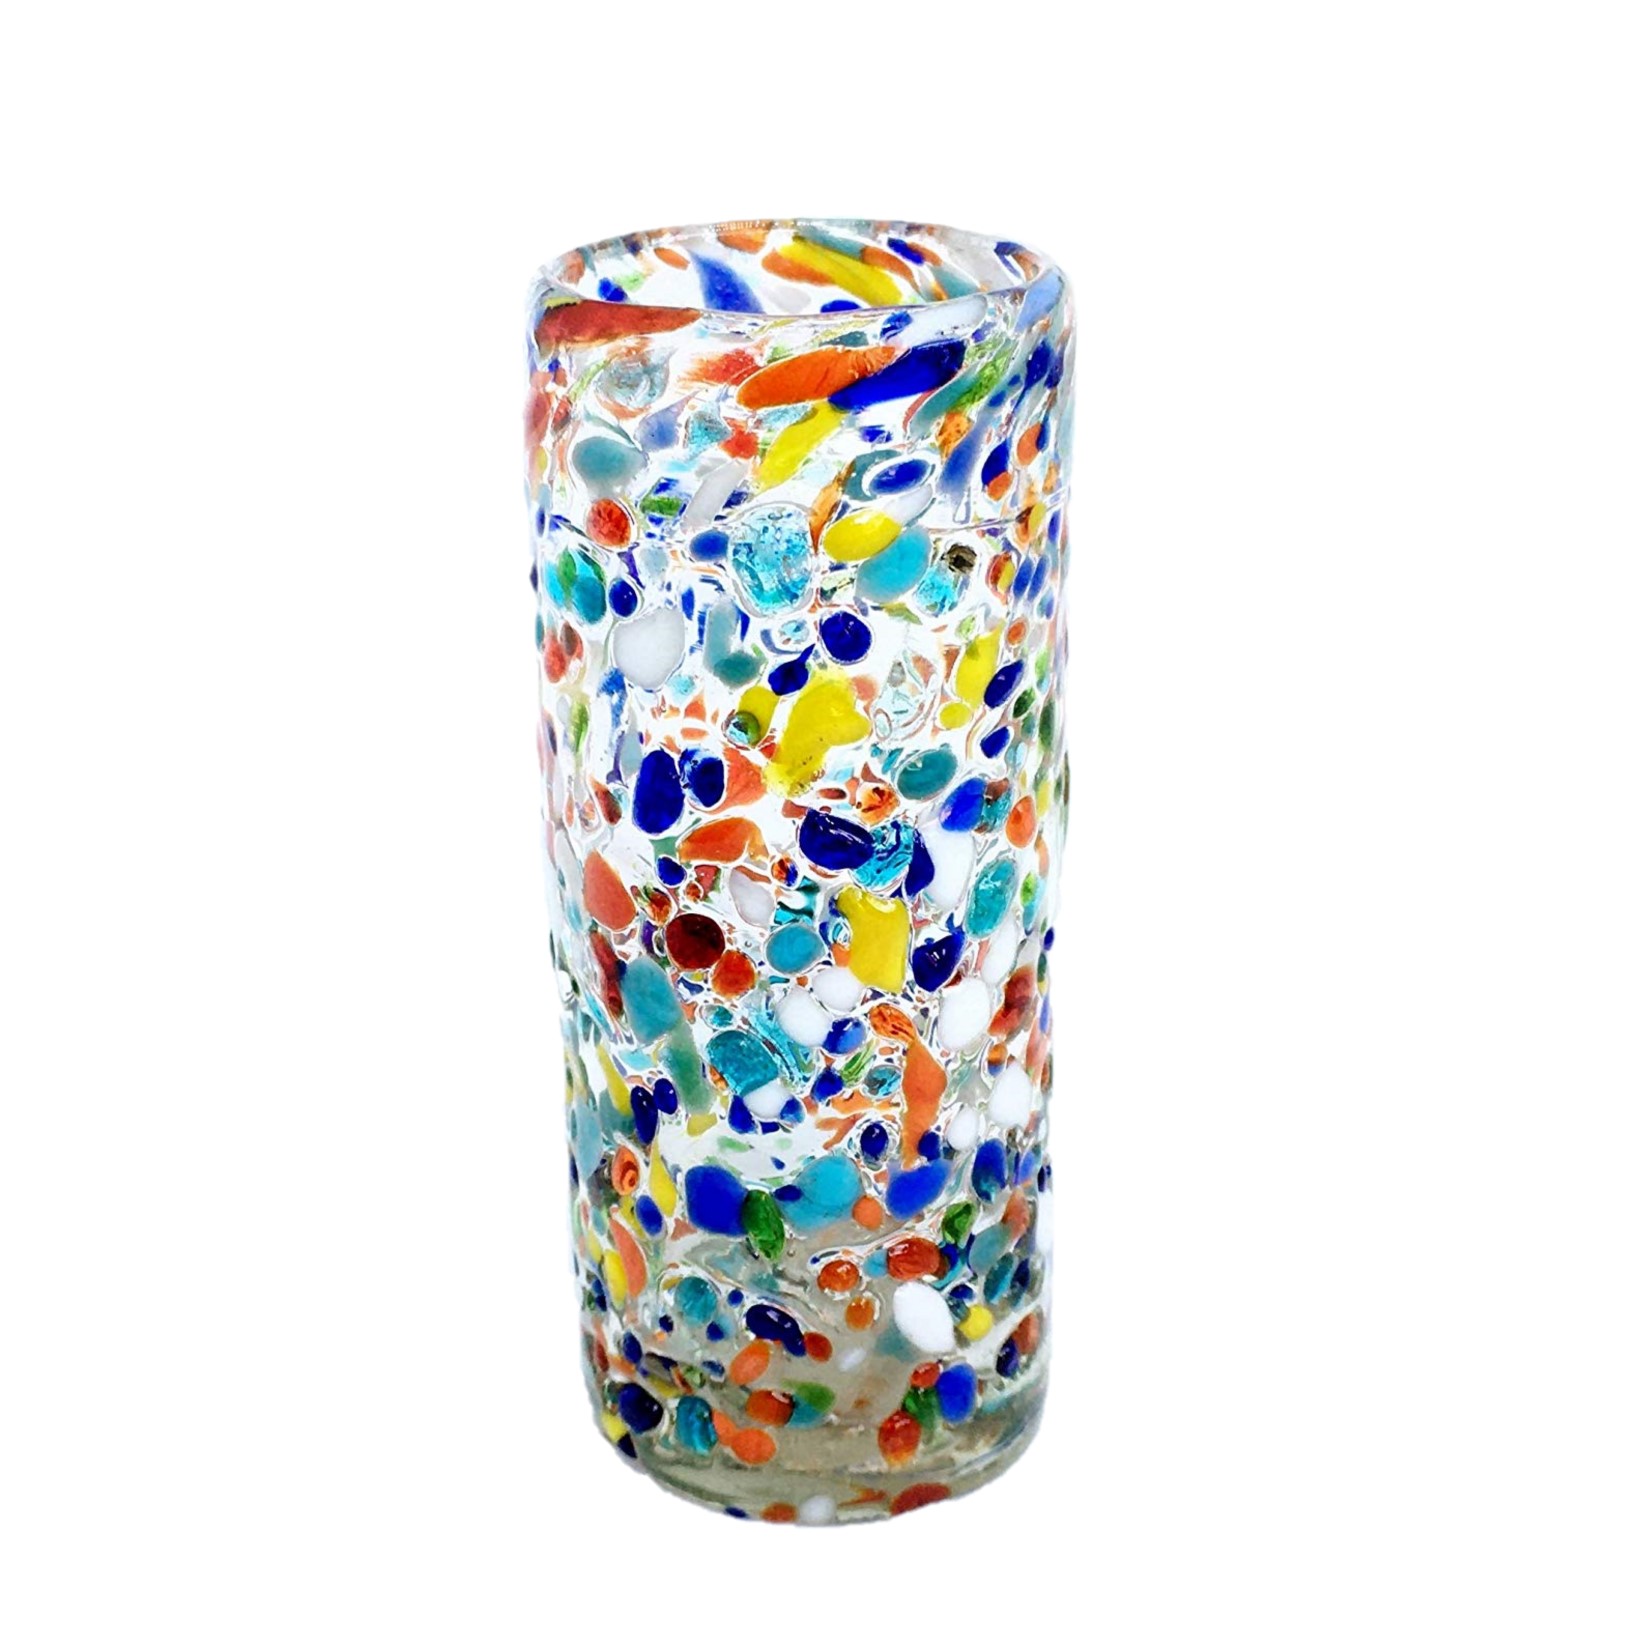 Confetti Glassware / Confetti Rocks 2 oz Tequila Shot Glasses (set of 6) / Sip your favorite Tequila or Mezcal with these iconic Confetti Rocks shot glasses, which are a must-have of any bar. Crafted one by one by skilled artisans in Tonala, Mexico, each glass is different from the next making them unique works of art. They feature our colorful Confetti rocks design with small colored-glass rounded cristals embedded in clear glass that give them a nice feeling and grip. These shot glasses are festive and fun, making them a perfect gift for anyone. Get ready for your next fiesta!!